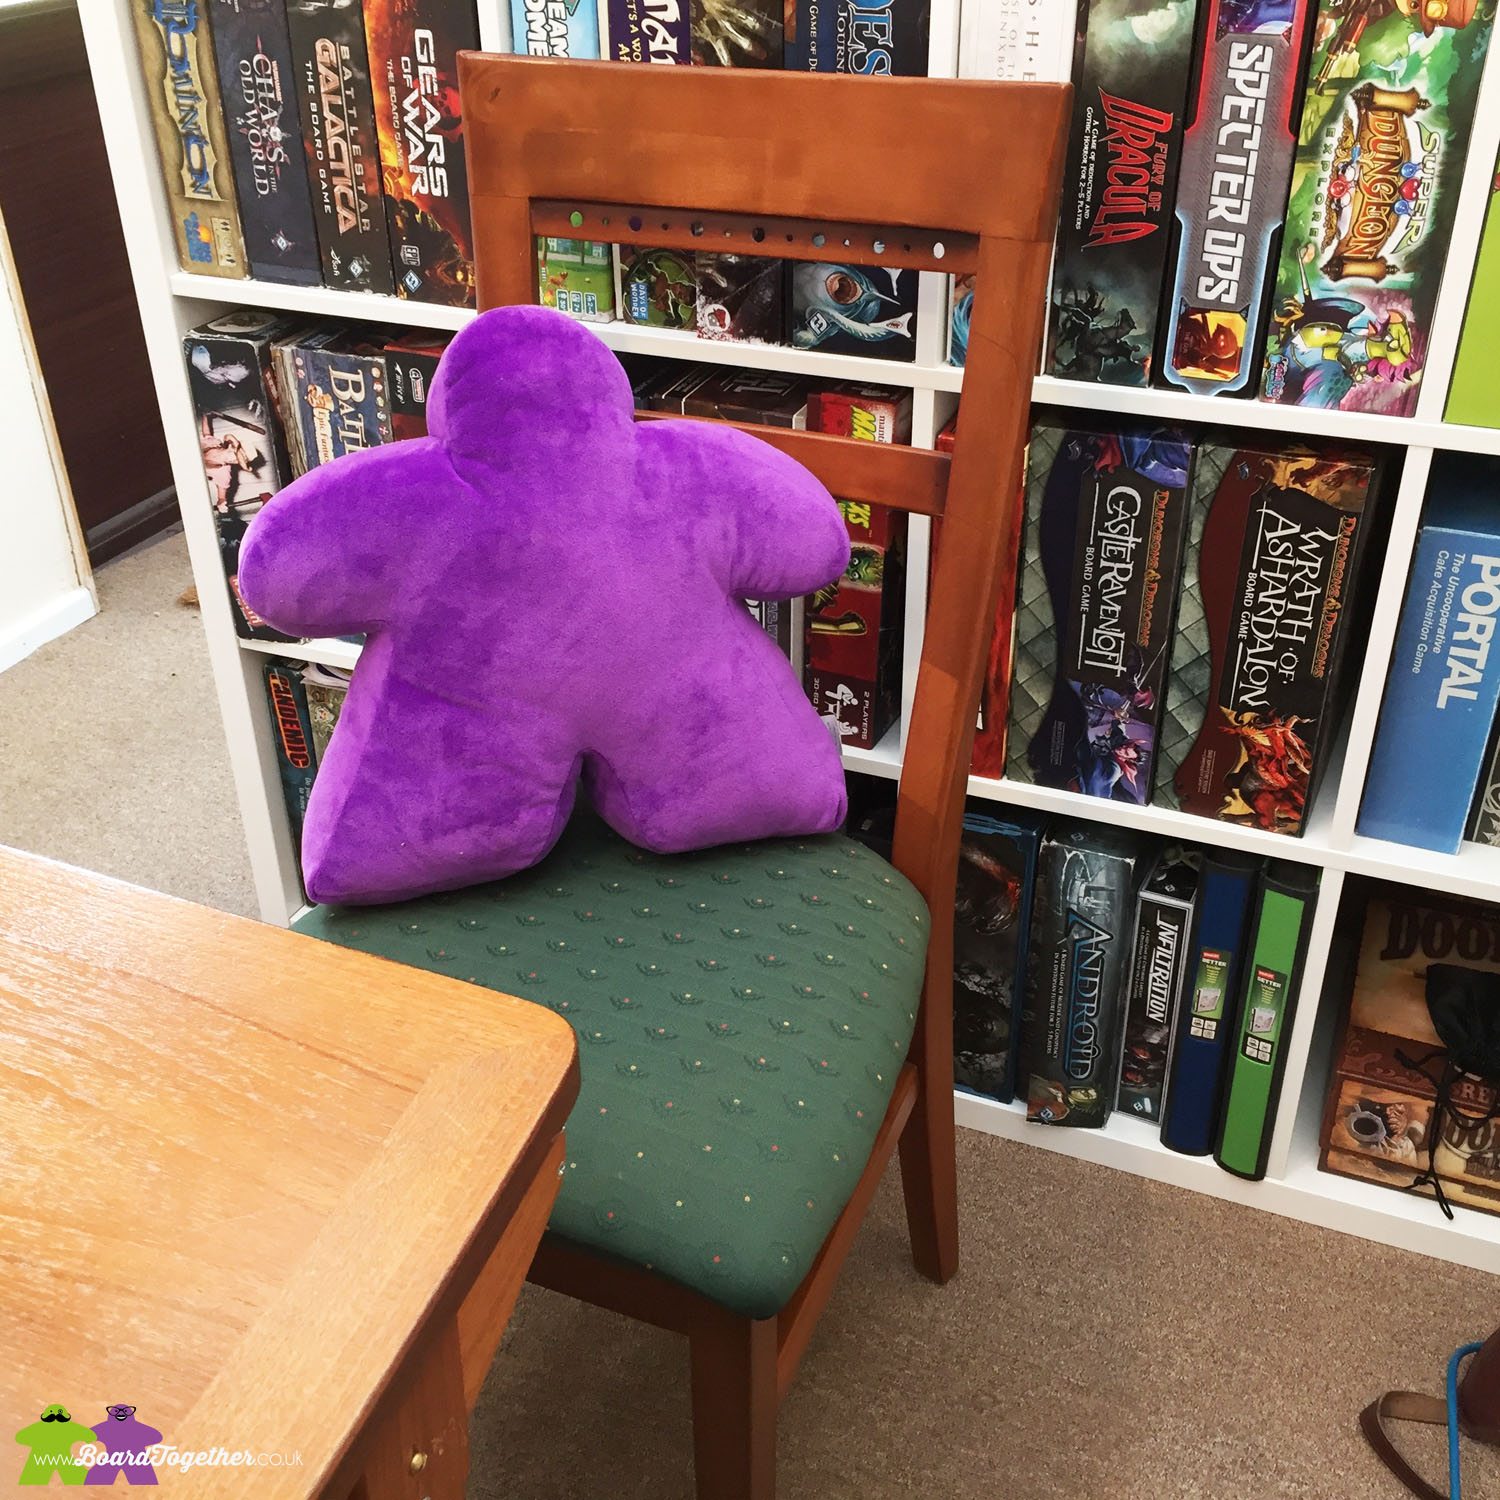 After 5 years our games room has evolved. We now know what works and what you really do need for a nice area to play games.